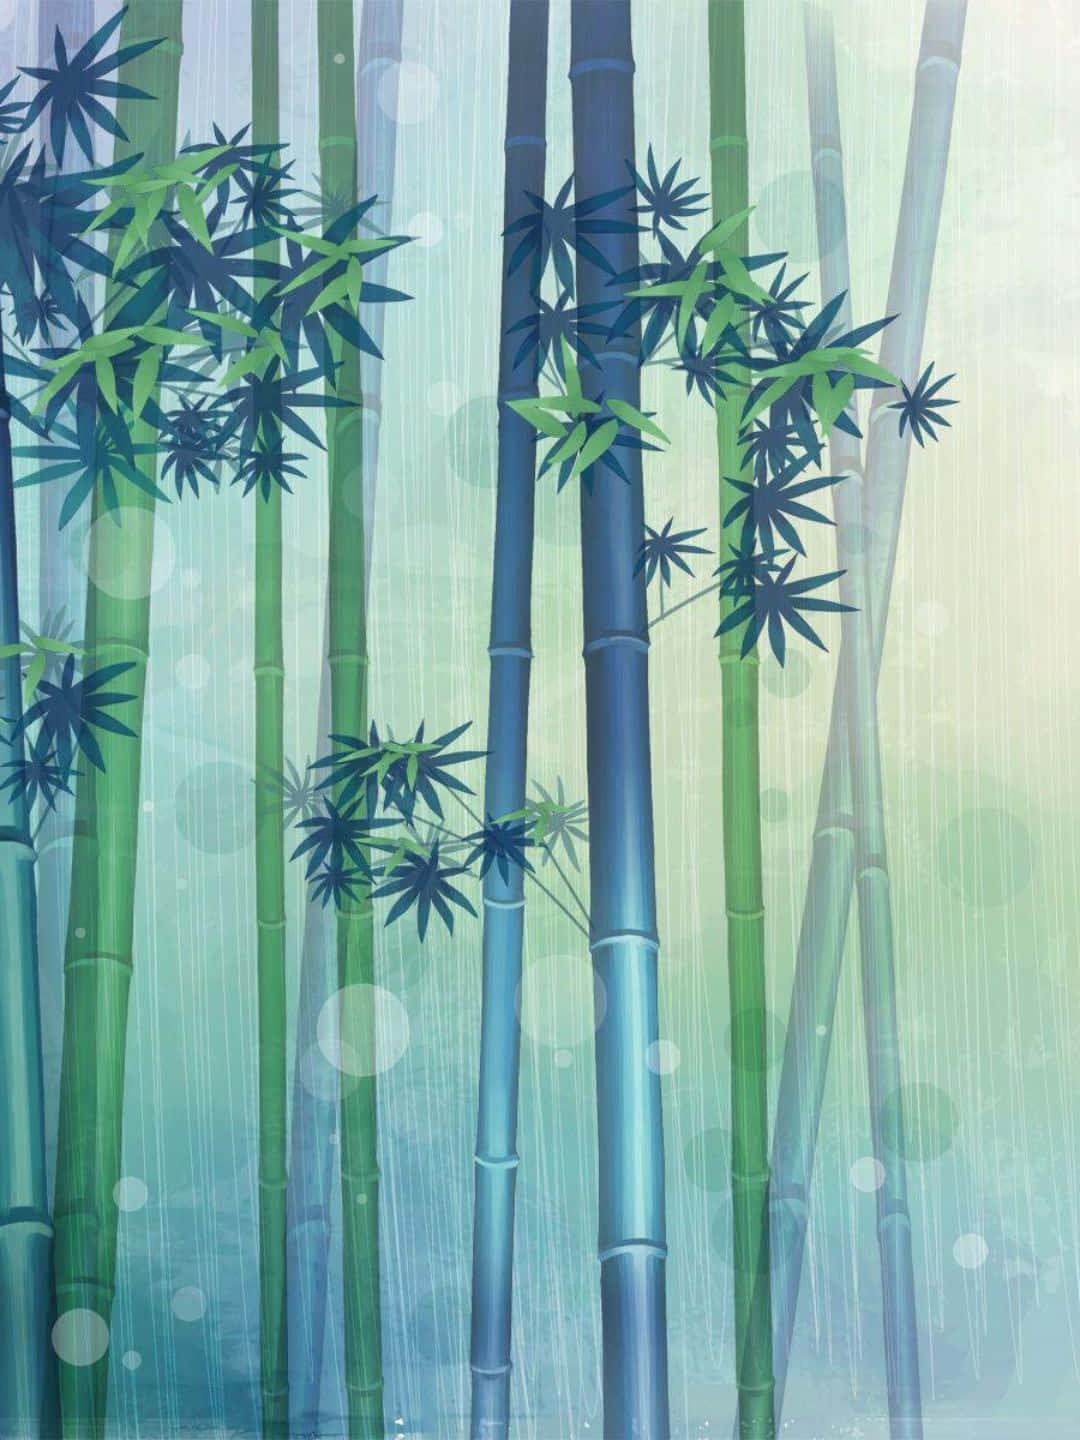 1440p Bamboo Background Fanart Drawing Of Bamboo Trees With Leaves